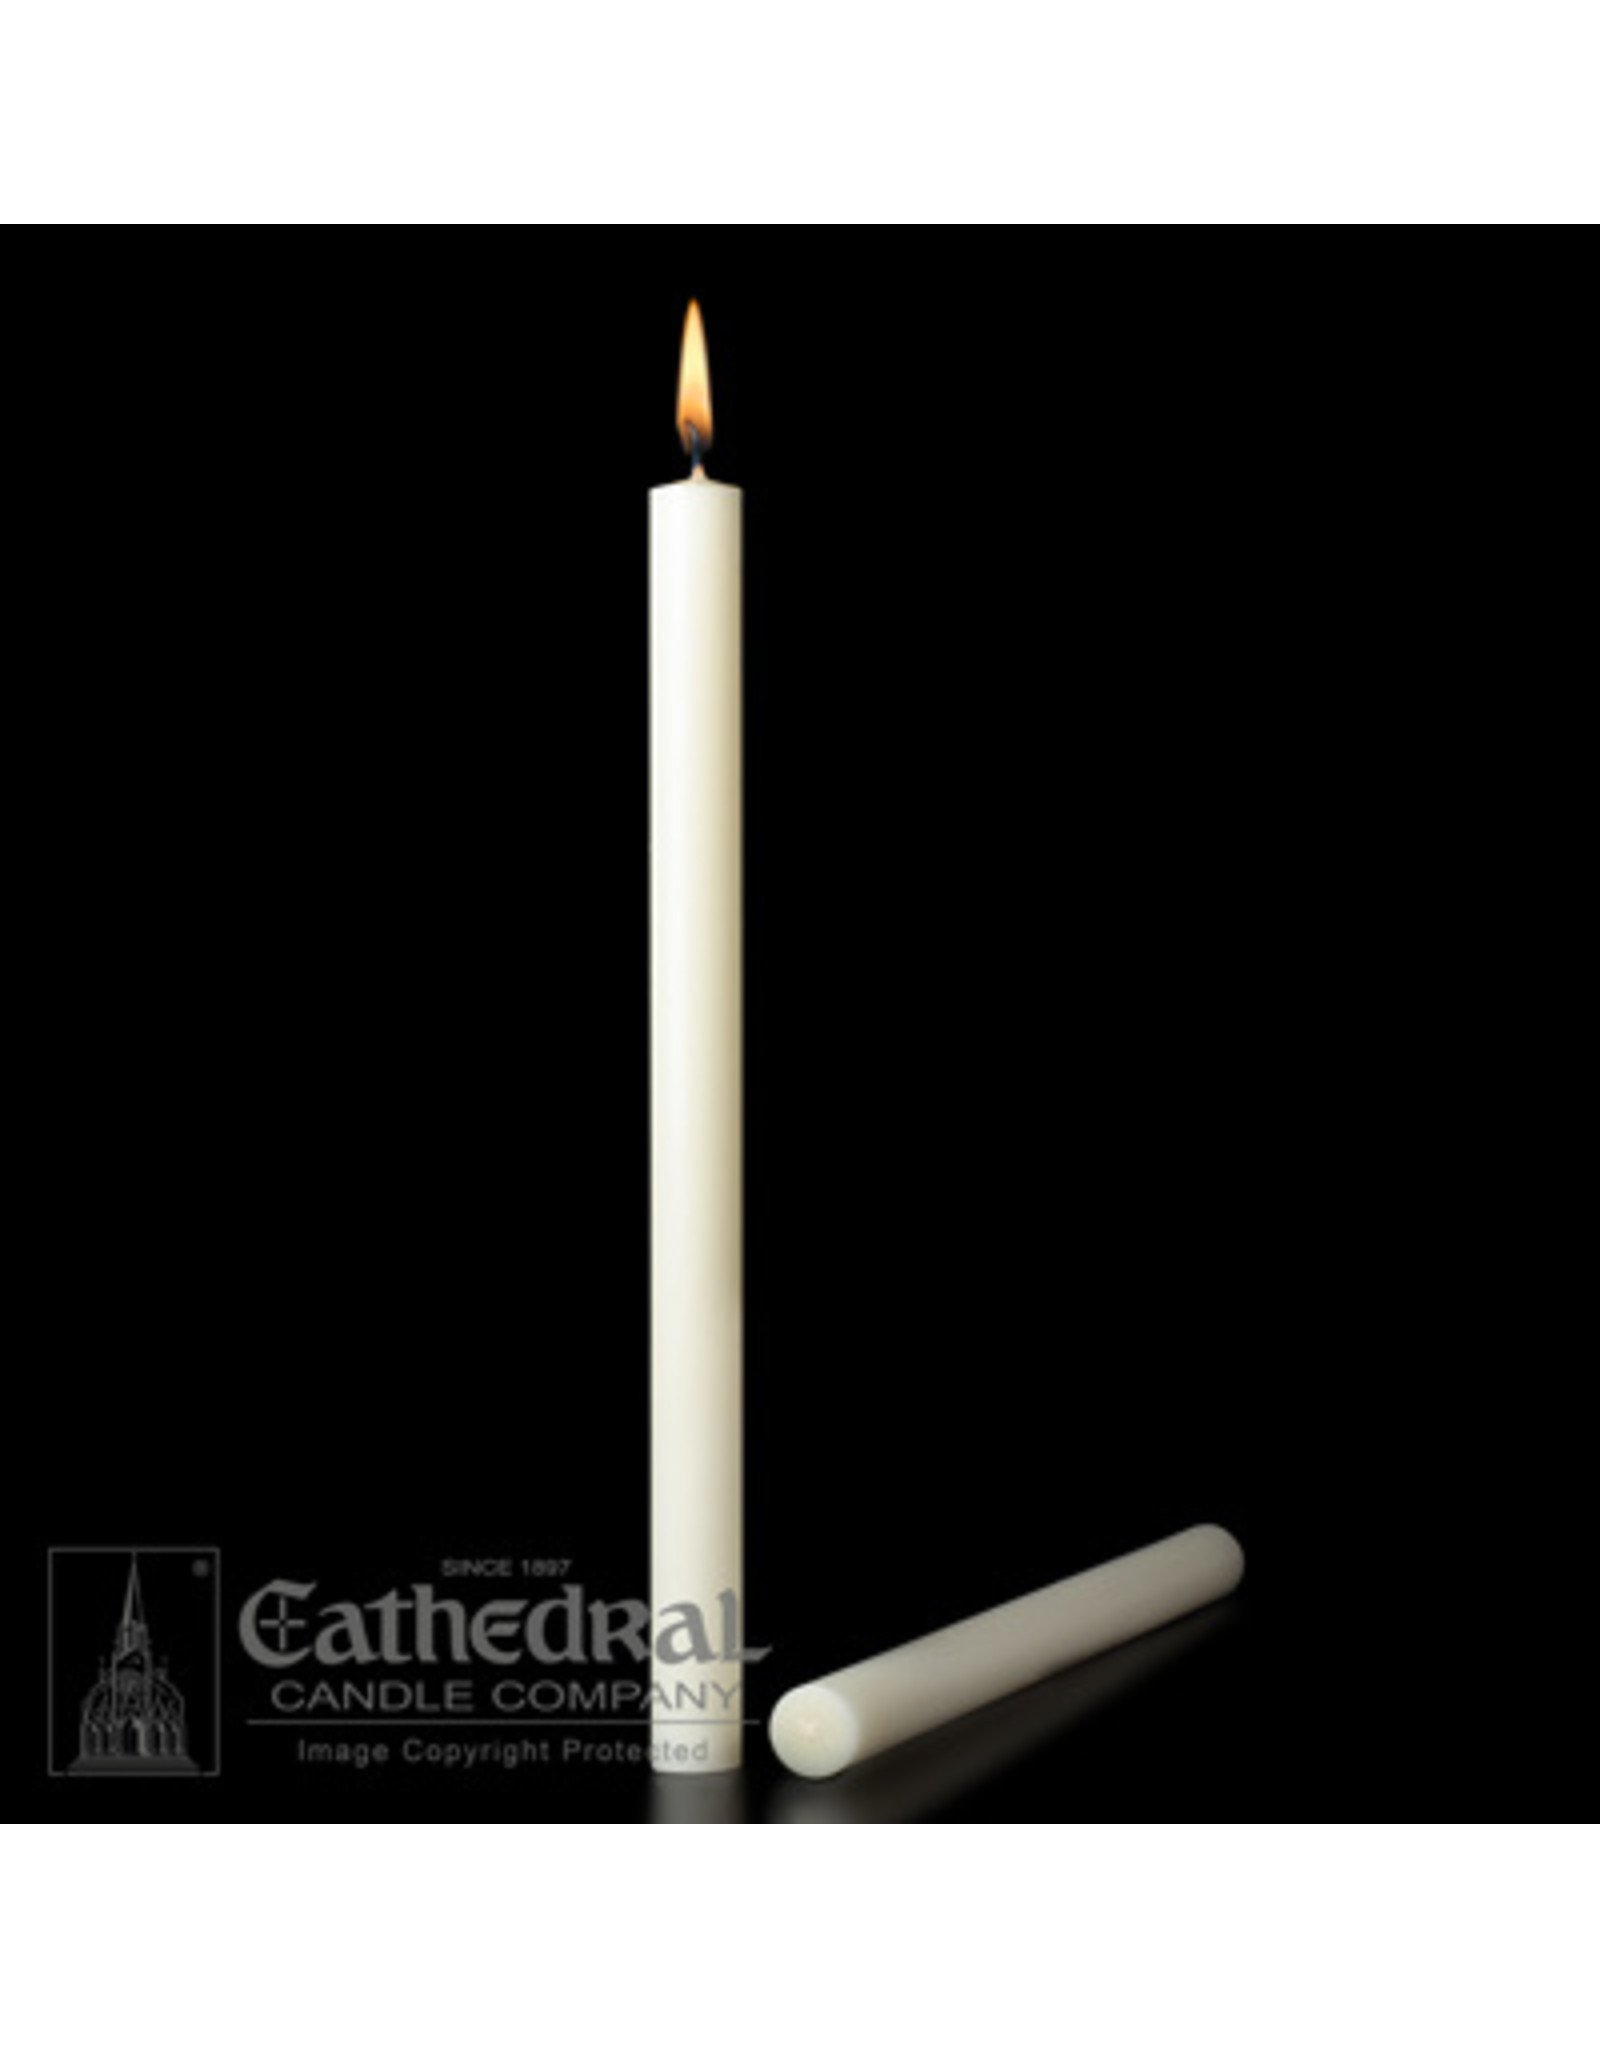 Cathedral Candle 51% Beeswax Altar Candles 1-1/8"x15" PE (12)